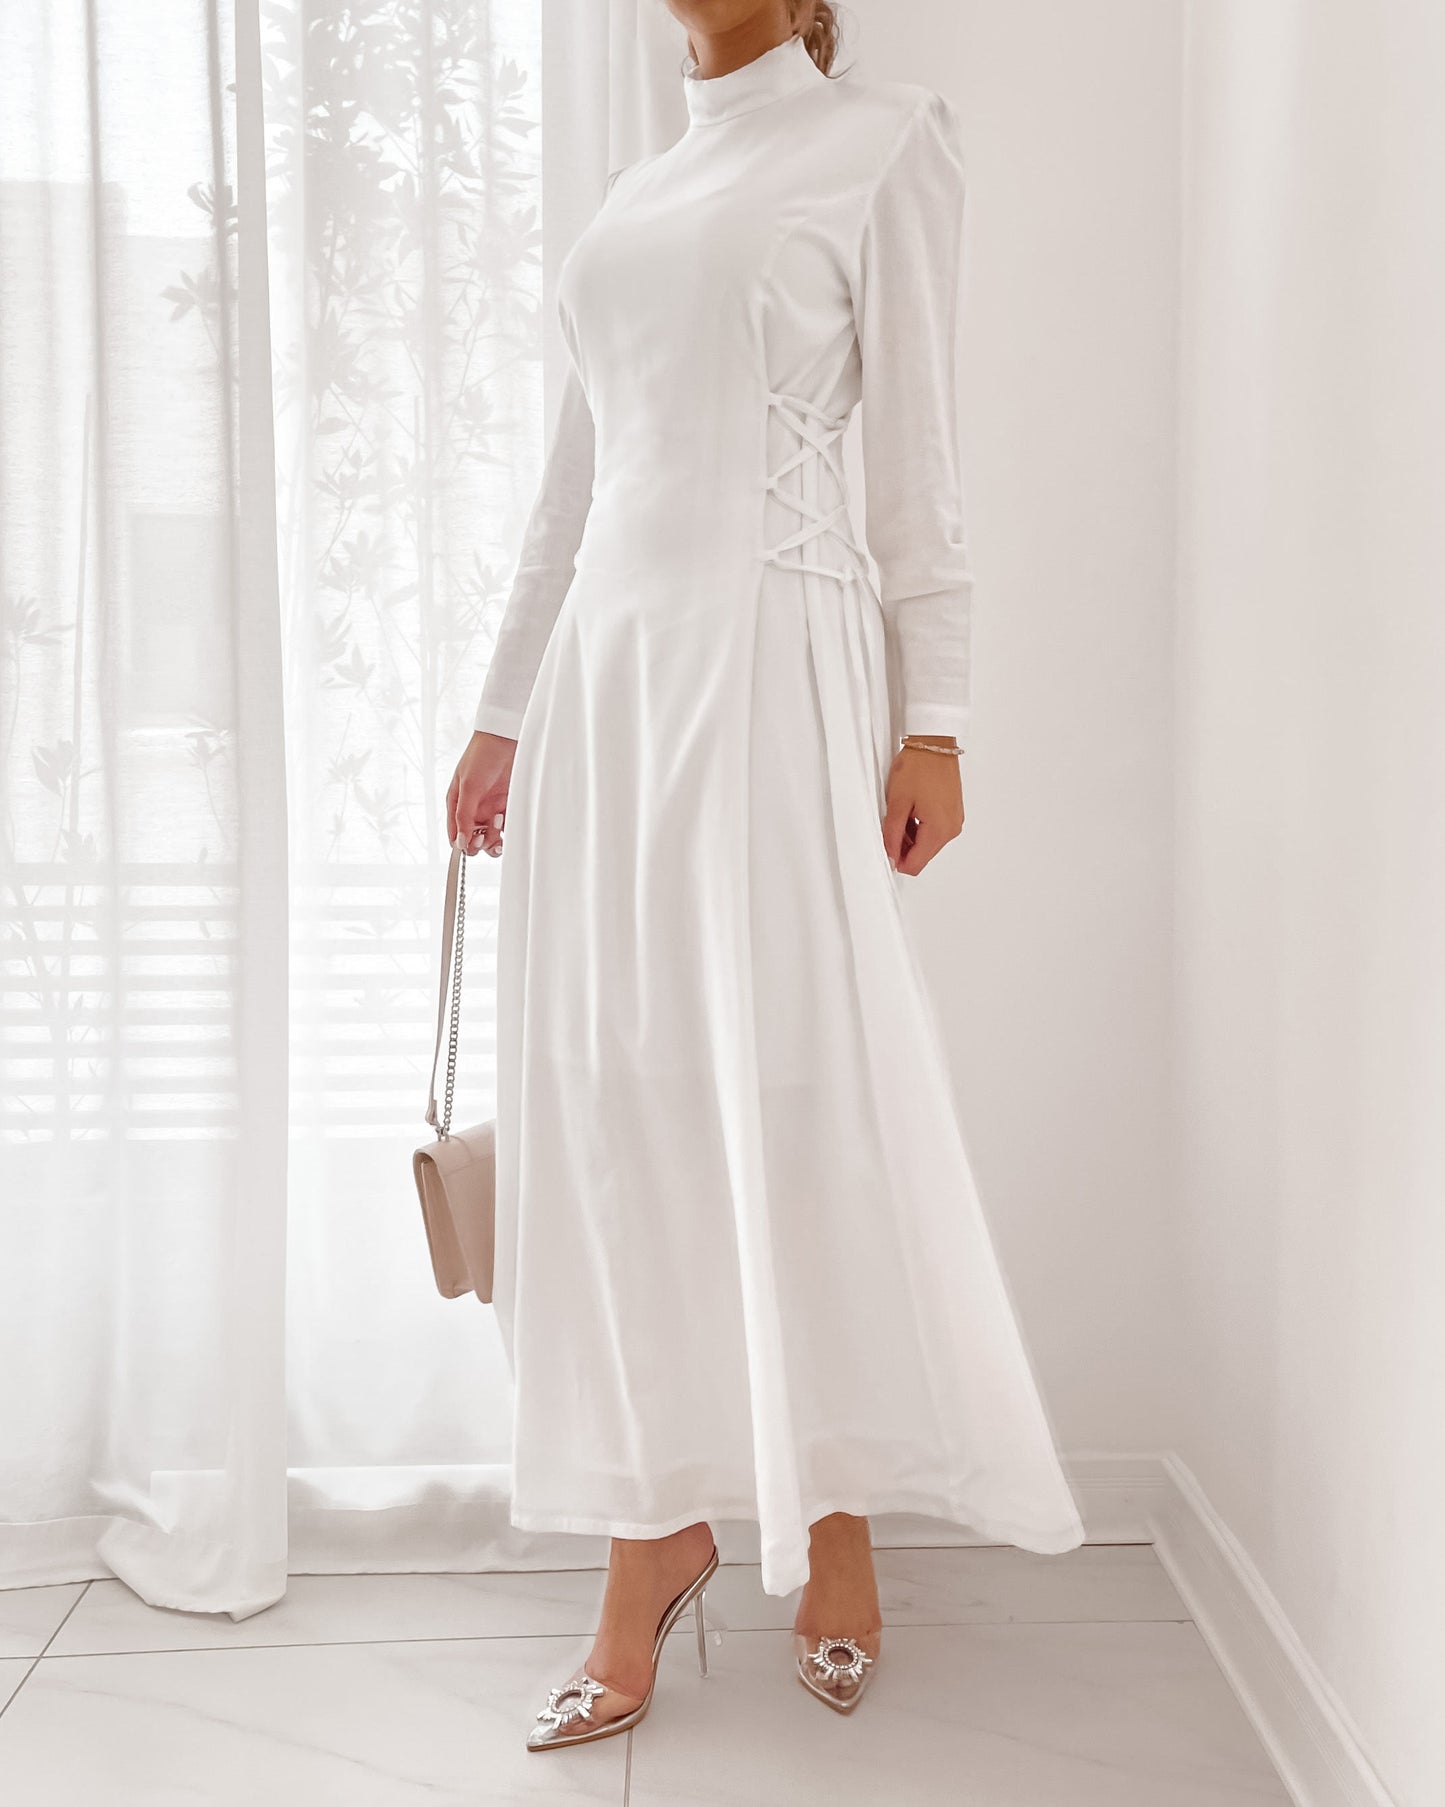 High neck maxi dress with side strap detail in white